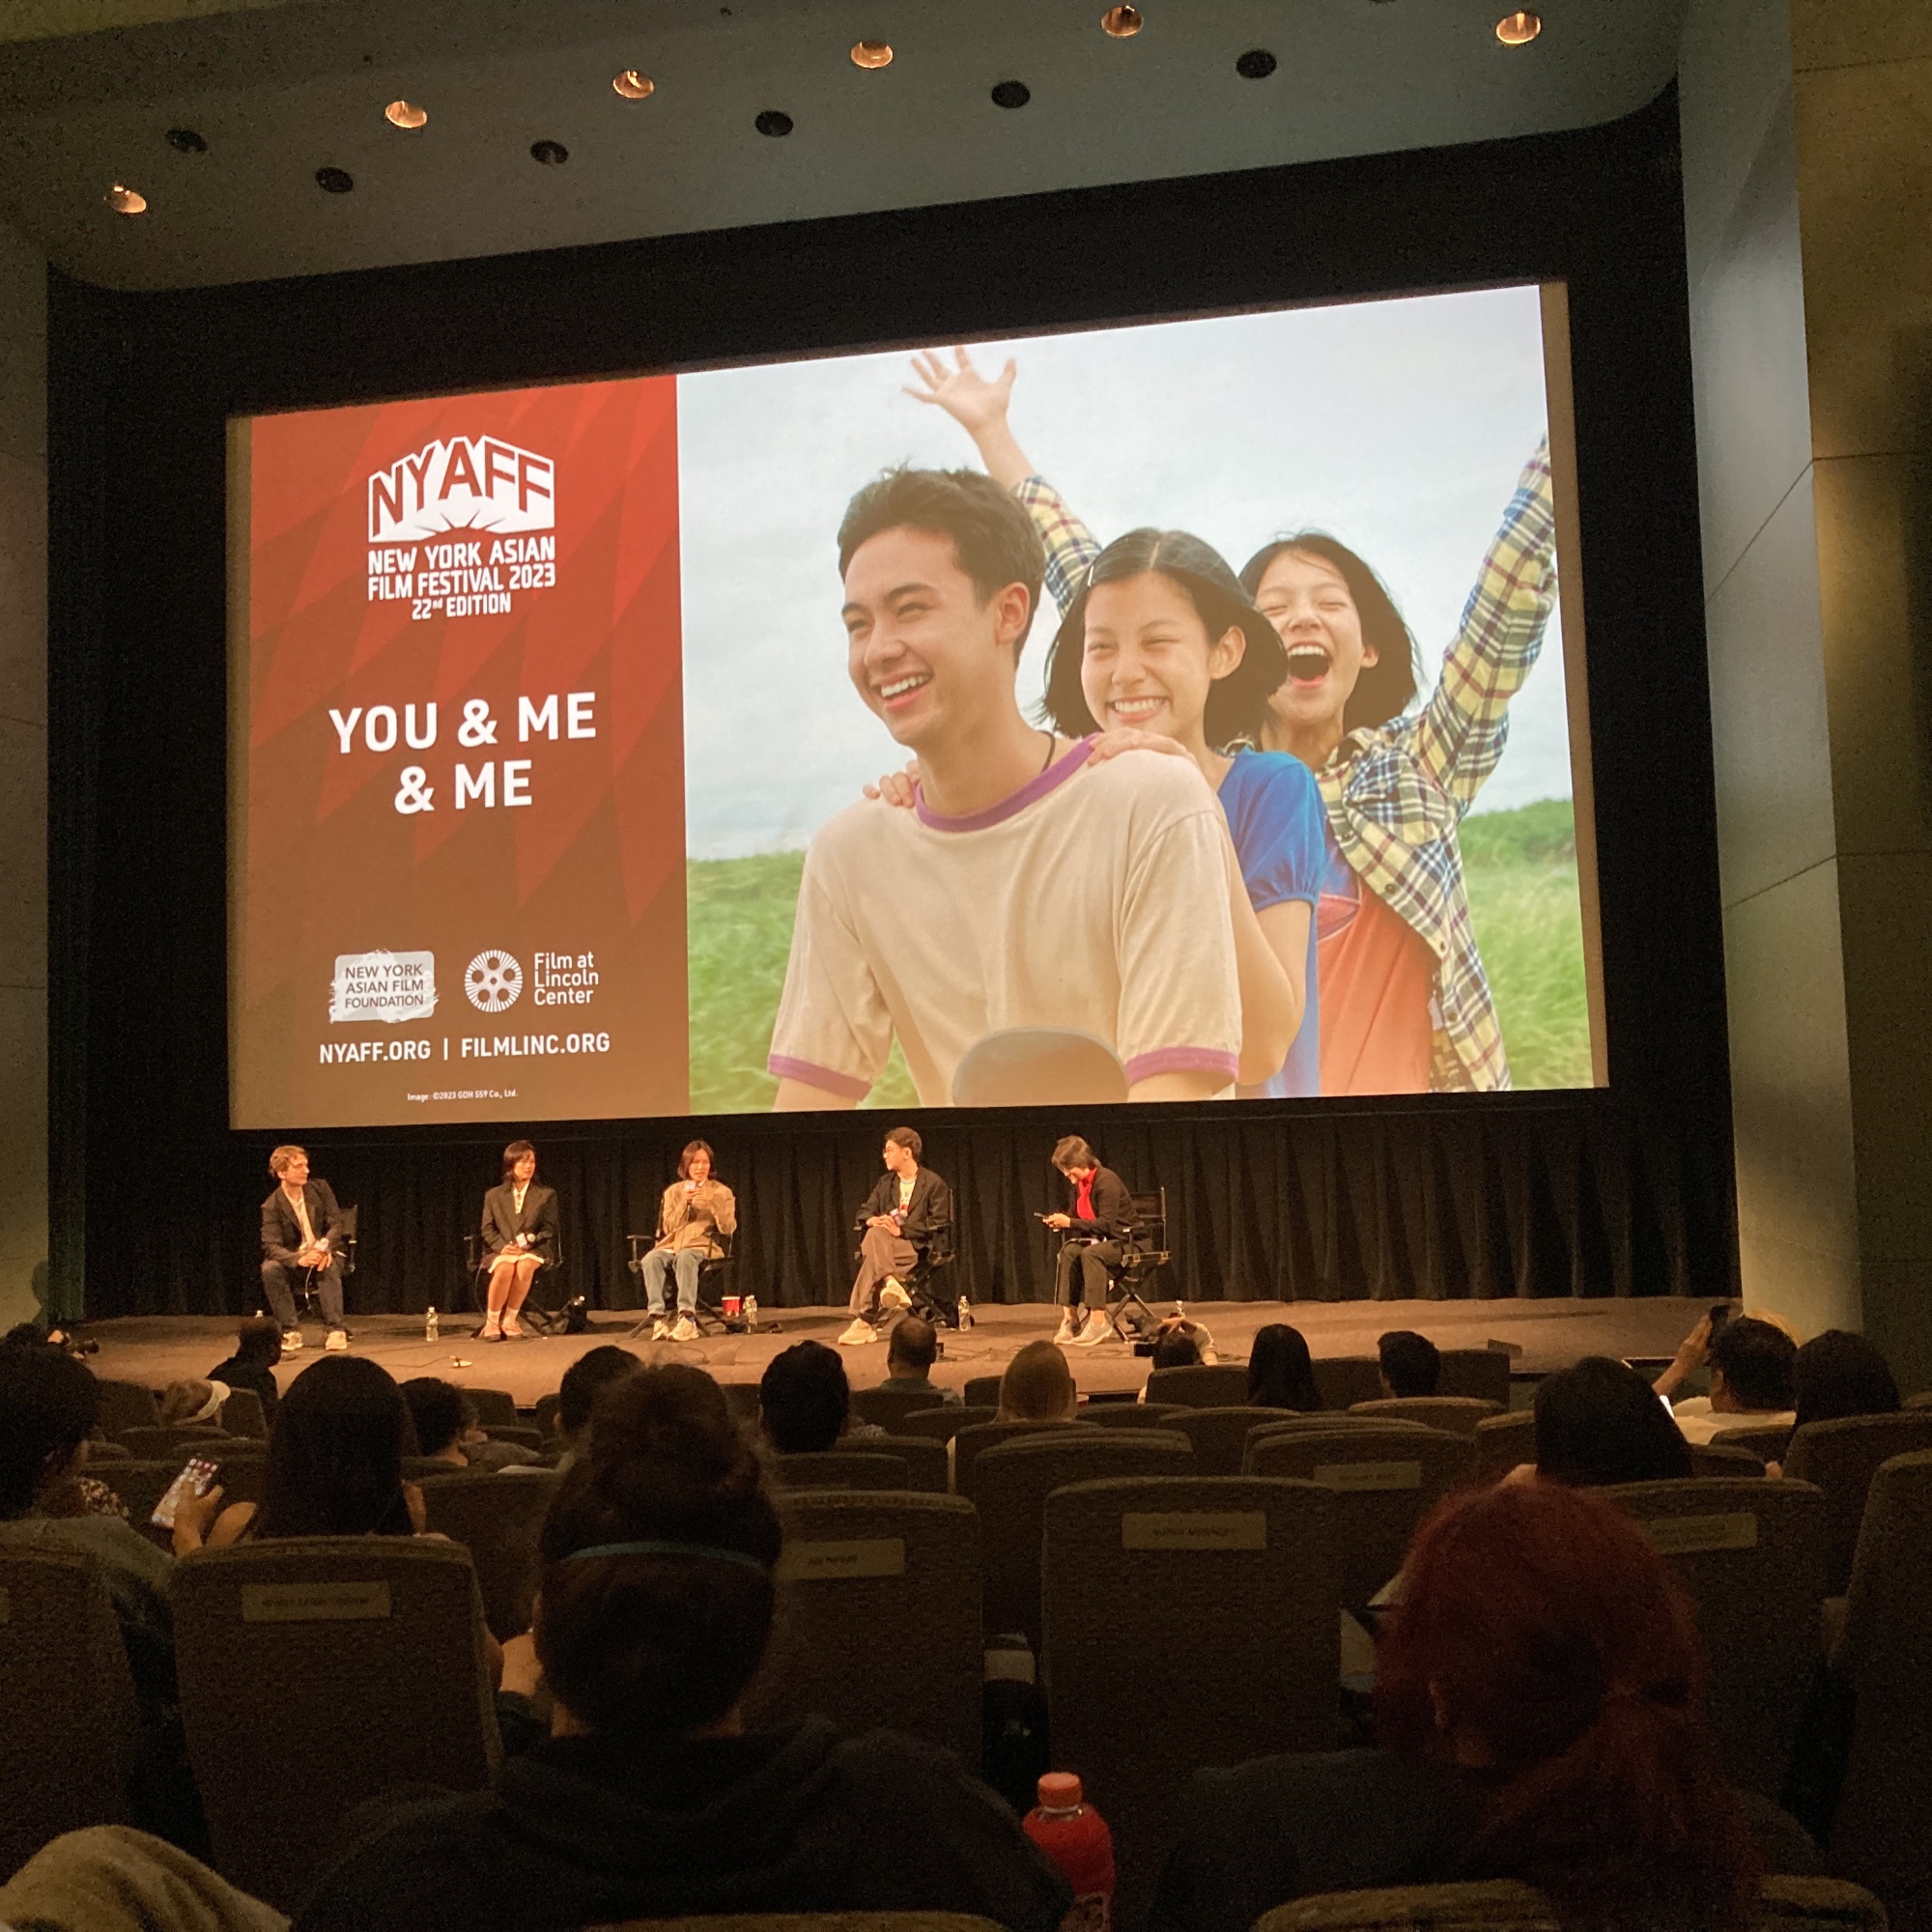 Directors Weawwan Hongvivatana and Wanweaw Hongvivatana do an audience Q&A following the North American premiere of their film, You & Me & Me, in The 2023 New York Asian Film Festival at Lincoln Center.